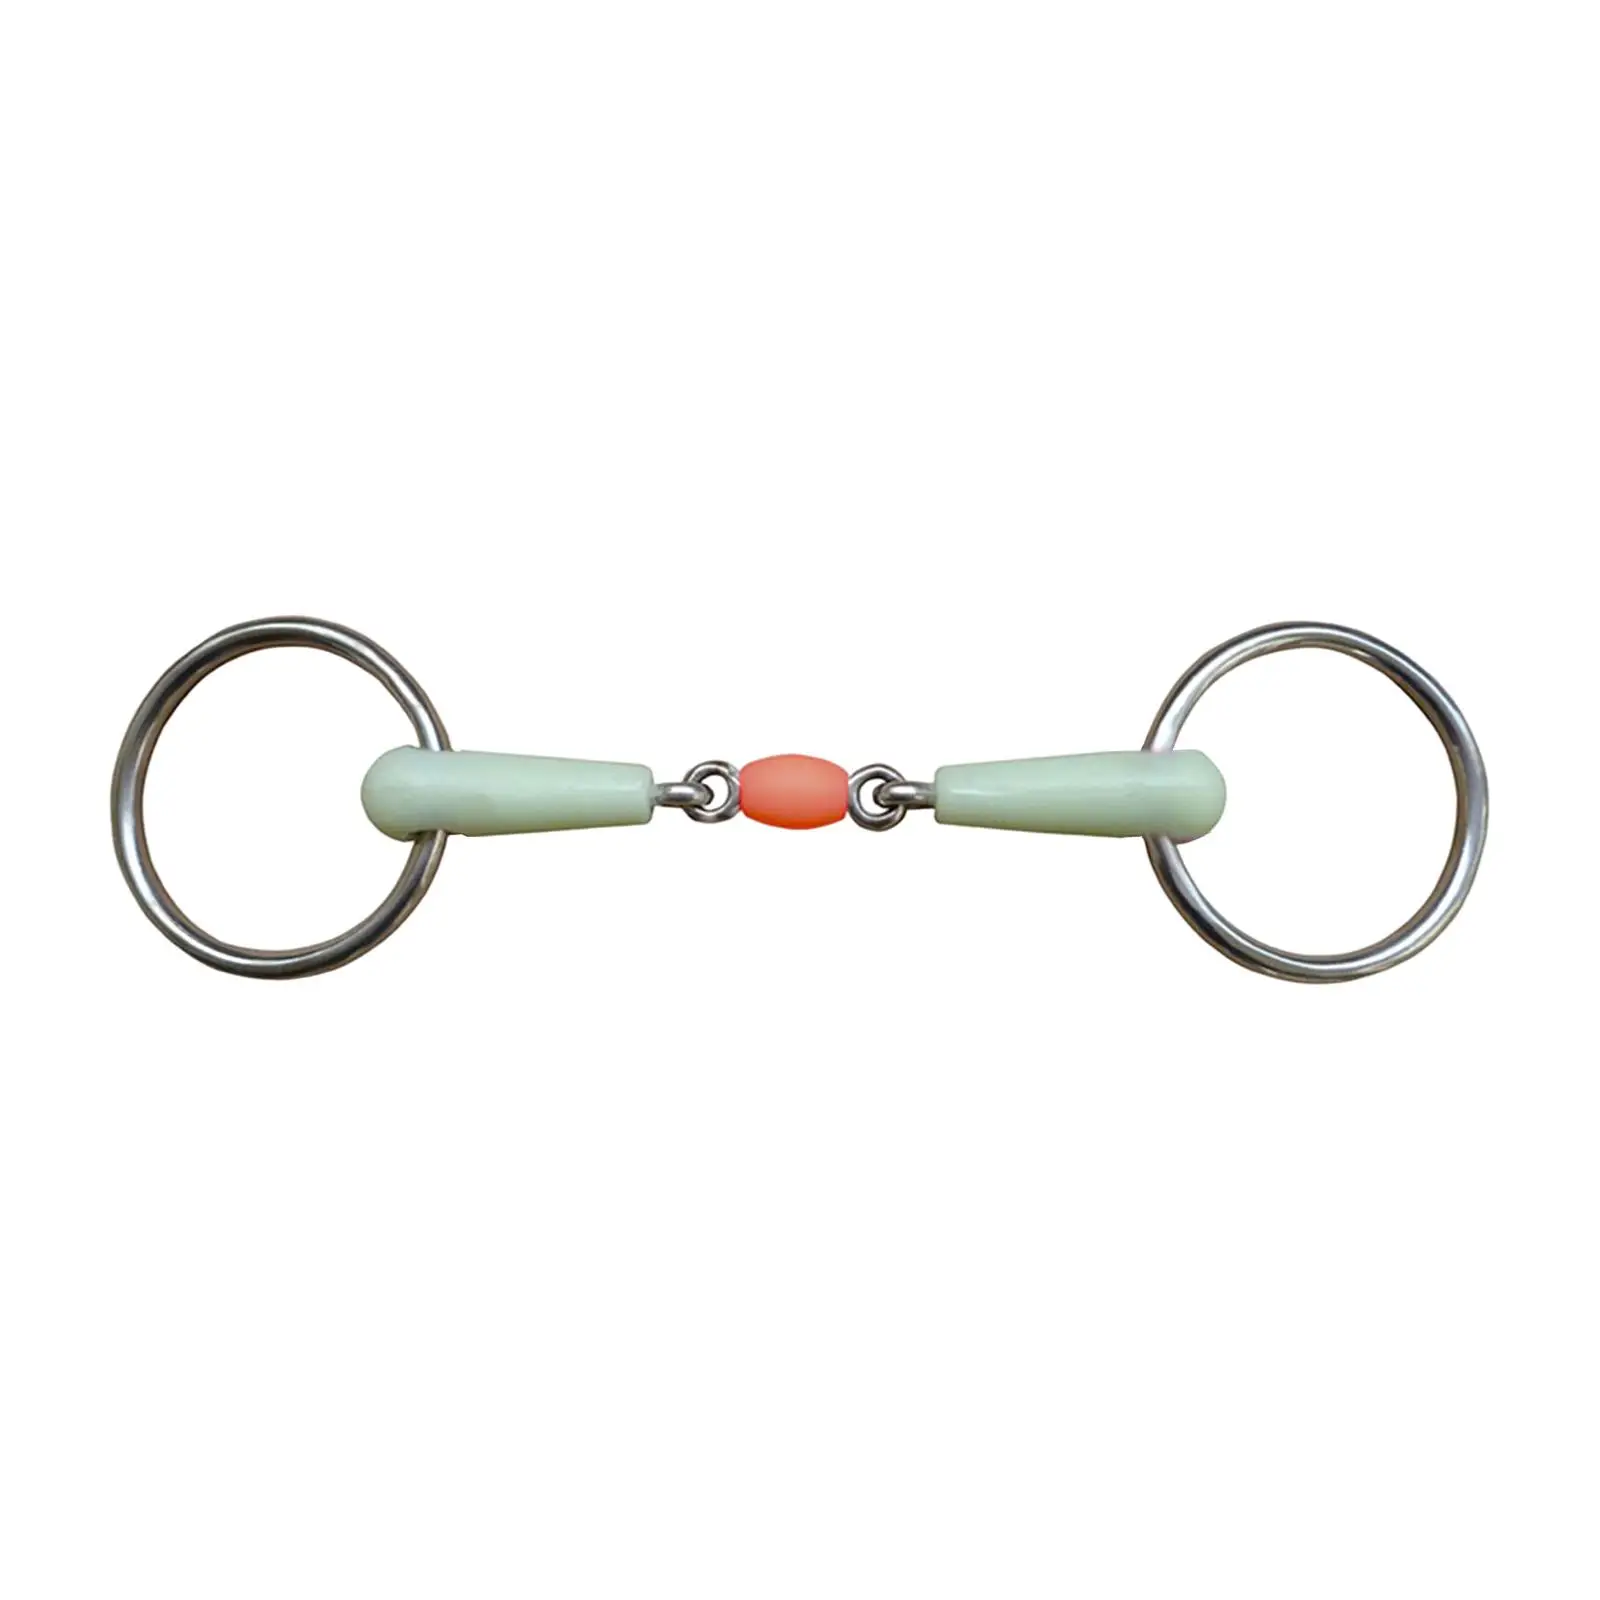 Professional Horse Mouth Bit Stainless Steel Hollow Snaffle Bits Jointed Mouth